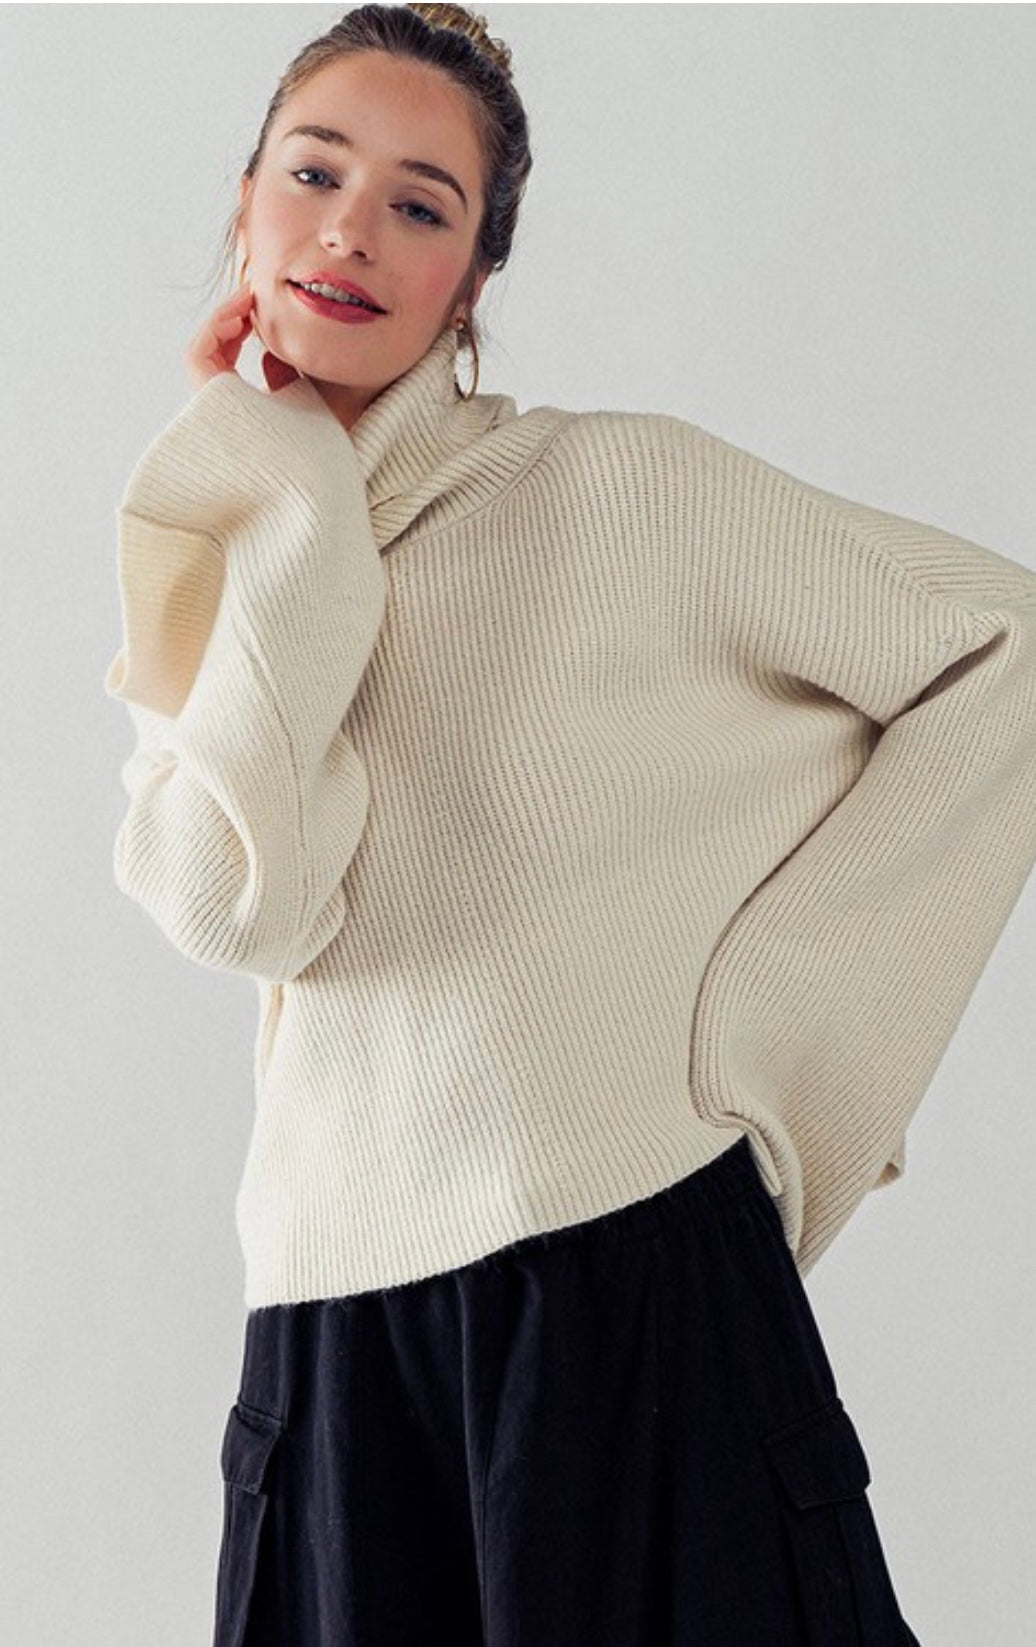 Bell Sleeved Knit Sweater